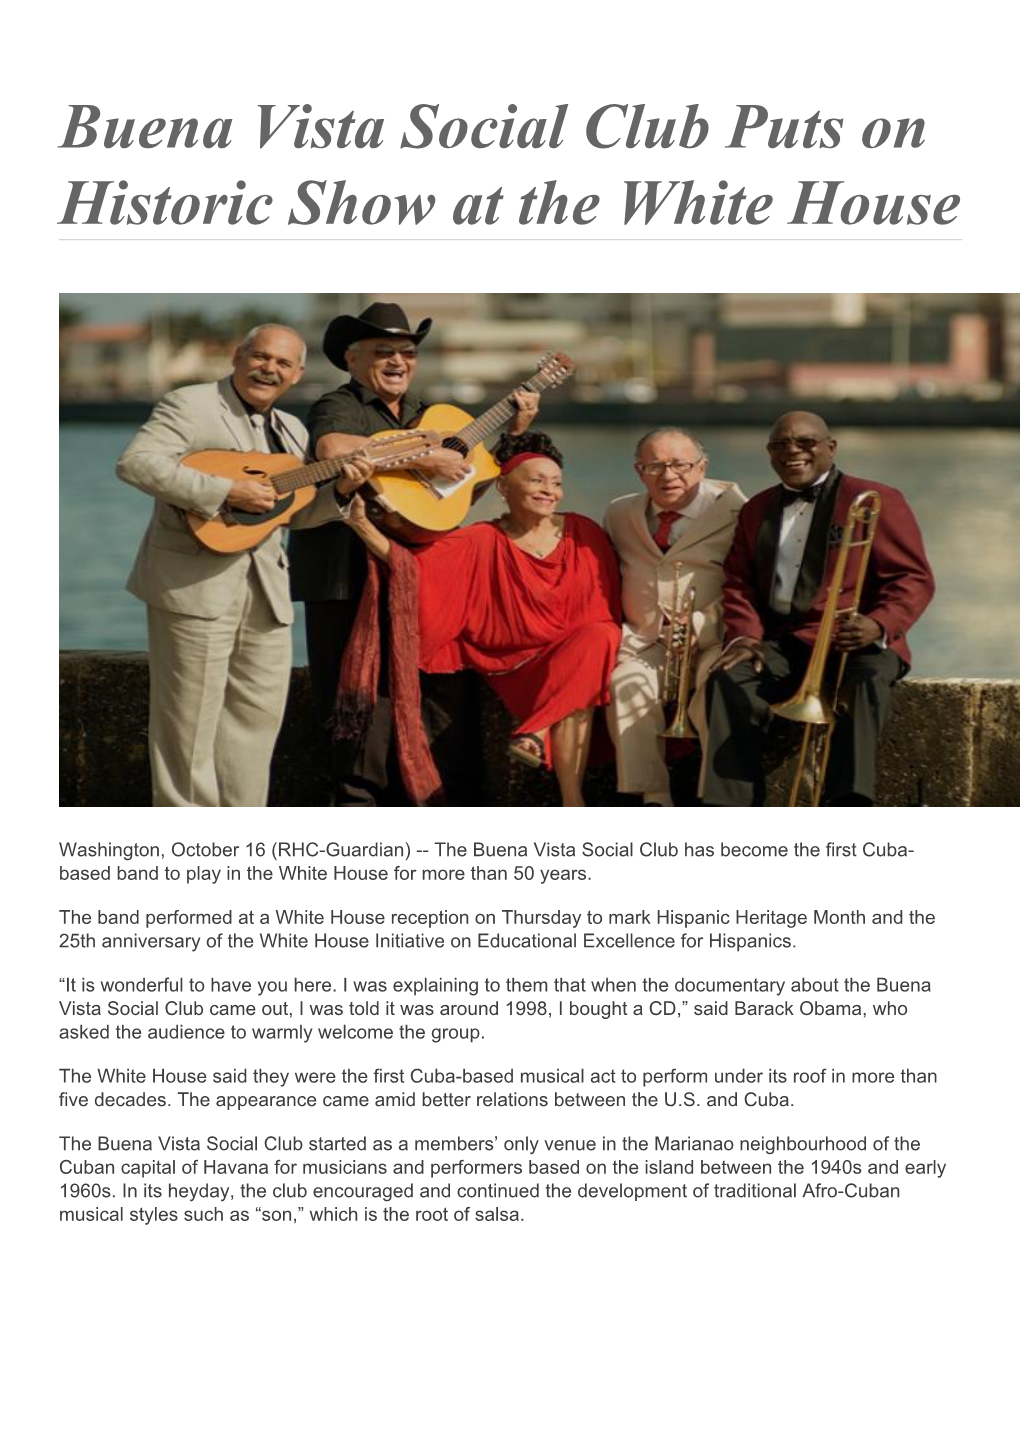 Buena Vista Social Club Puts on Historic Show at the White House